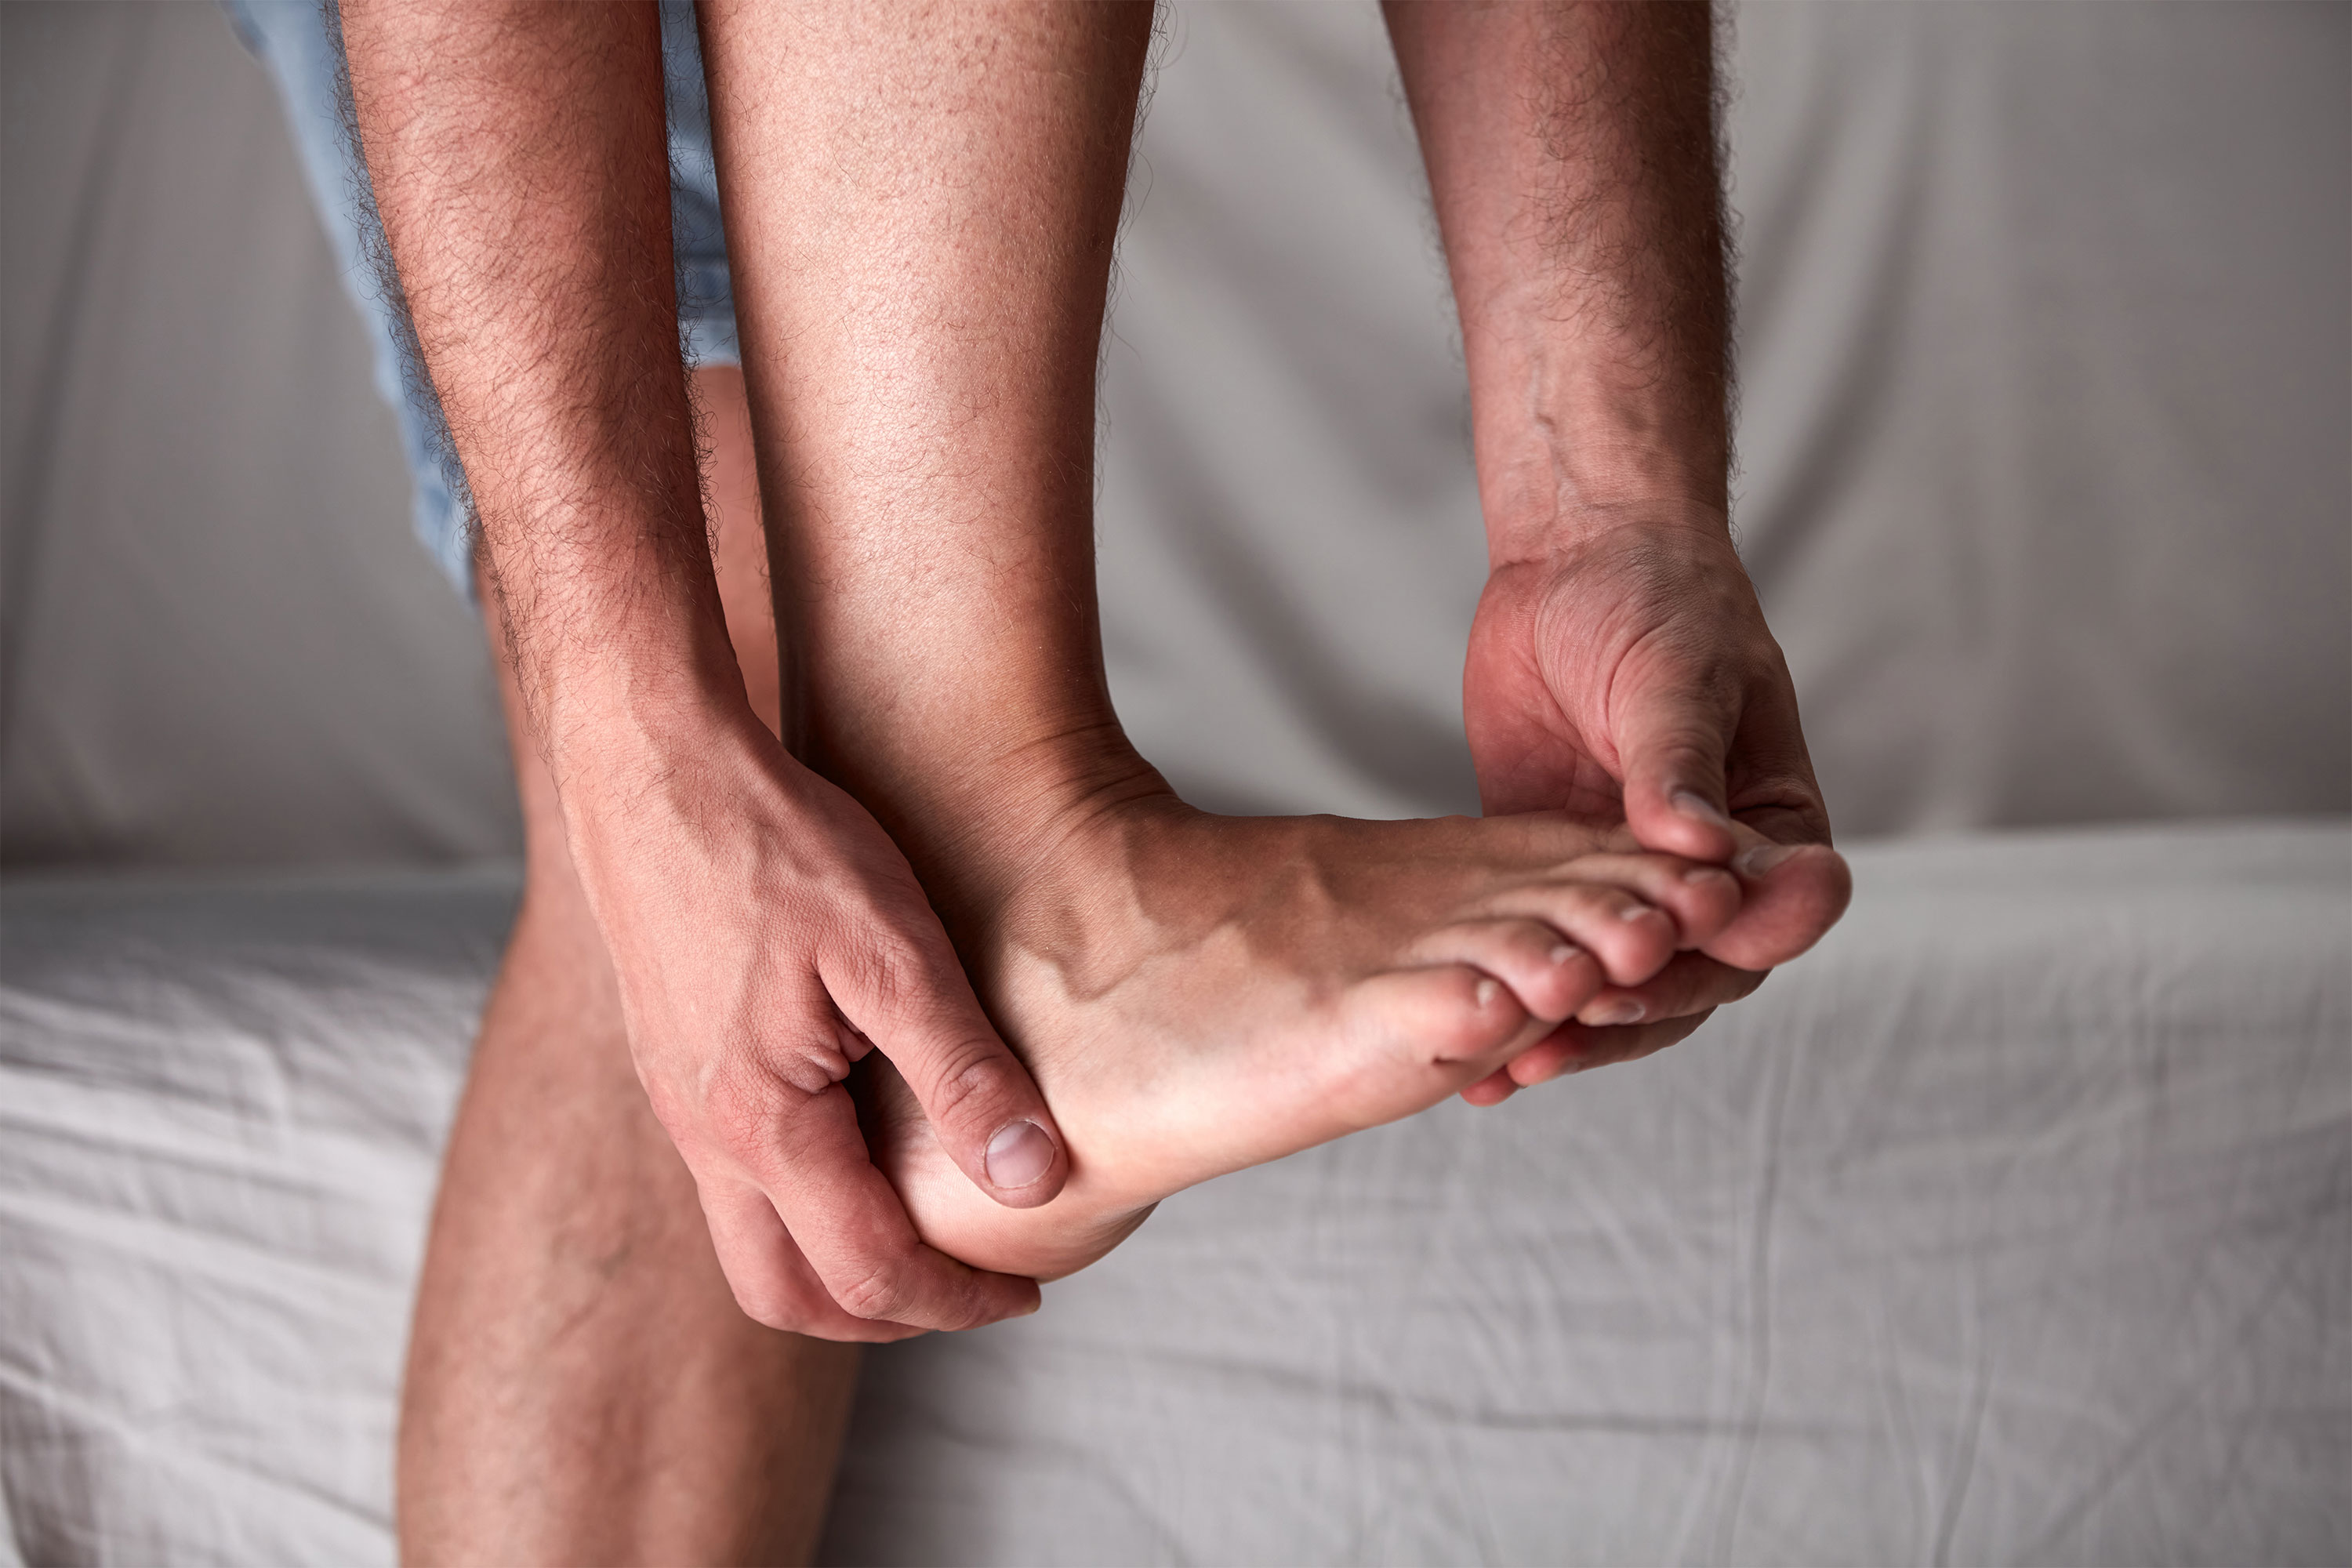 What Should I Do When My Foot or Ankle Pain Won't Go Away? - Penn